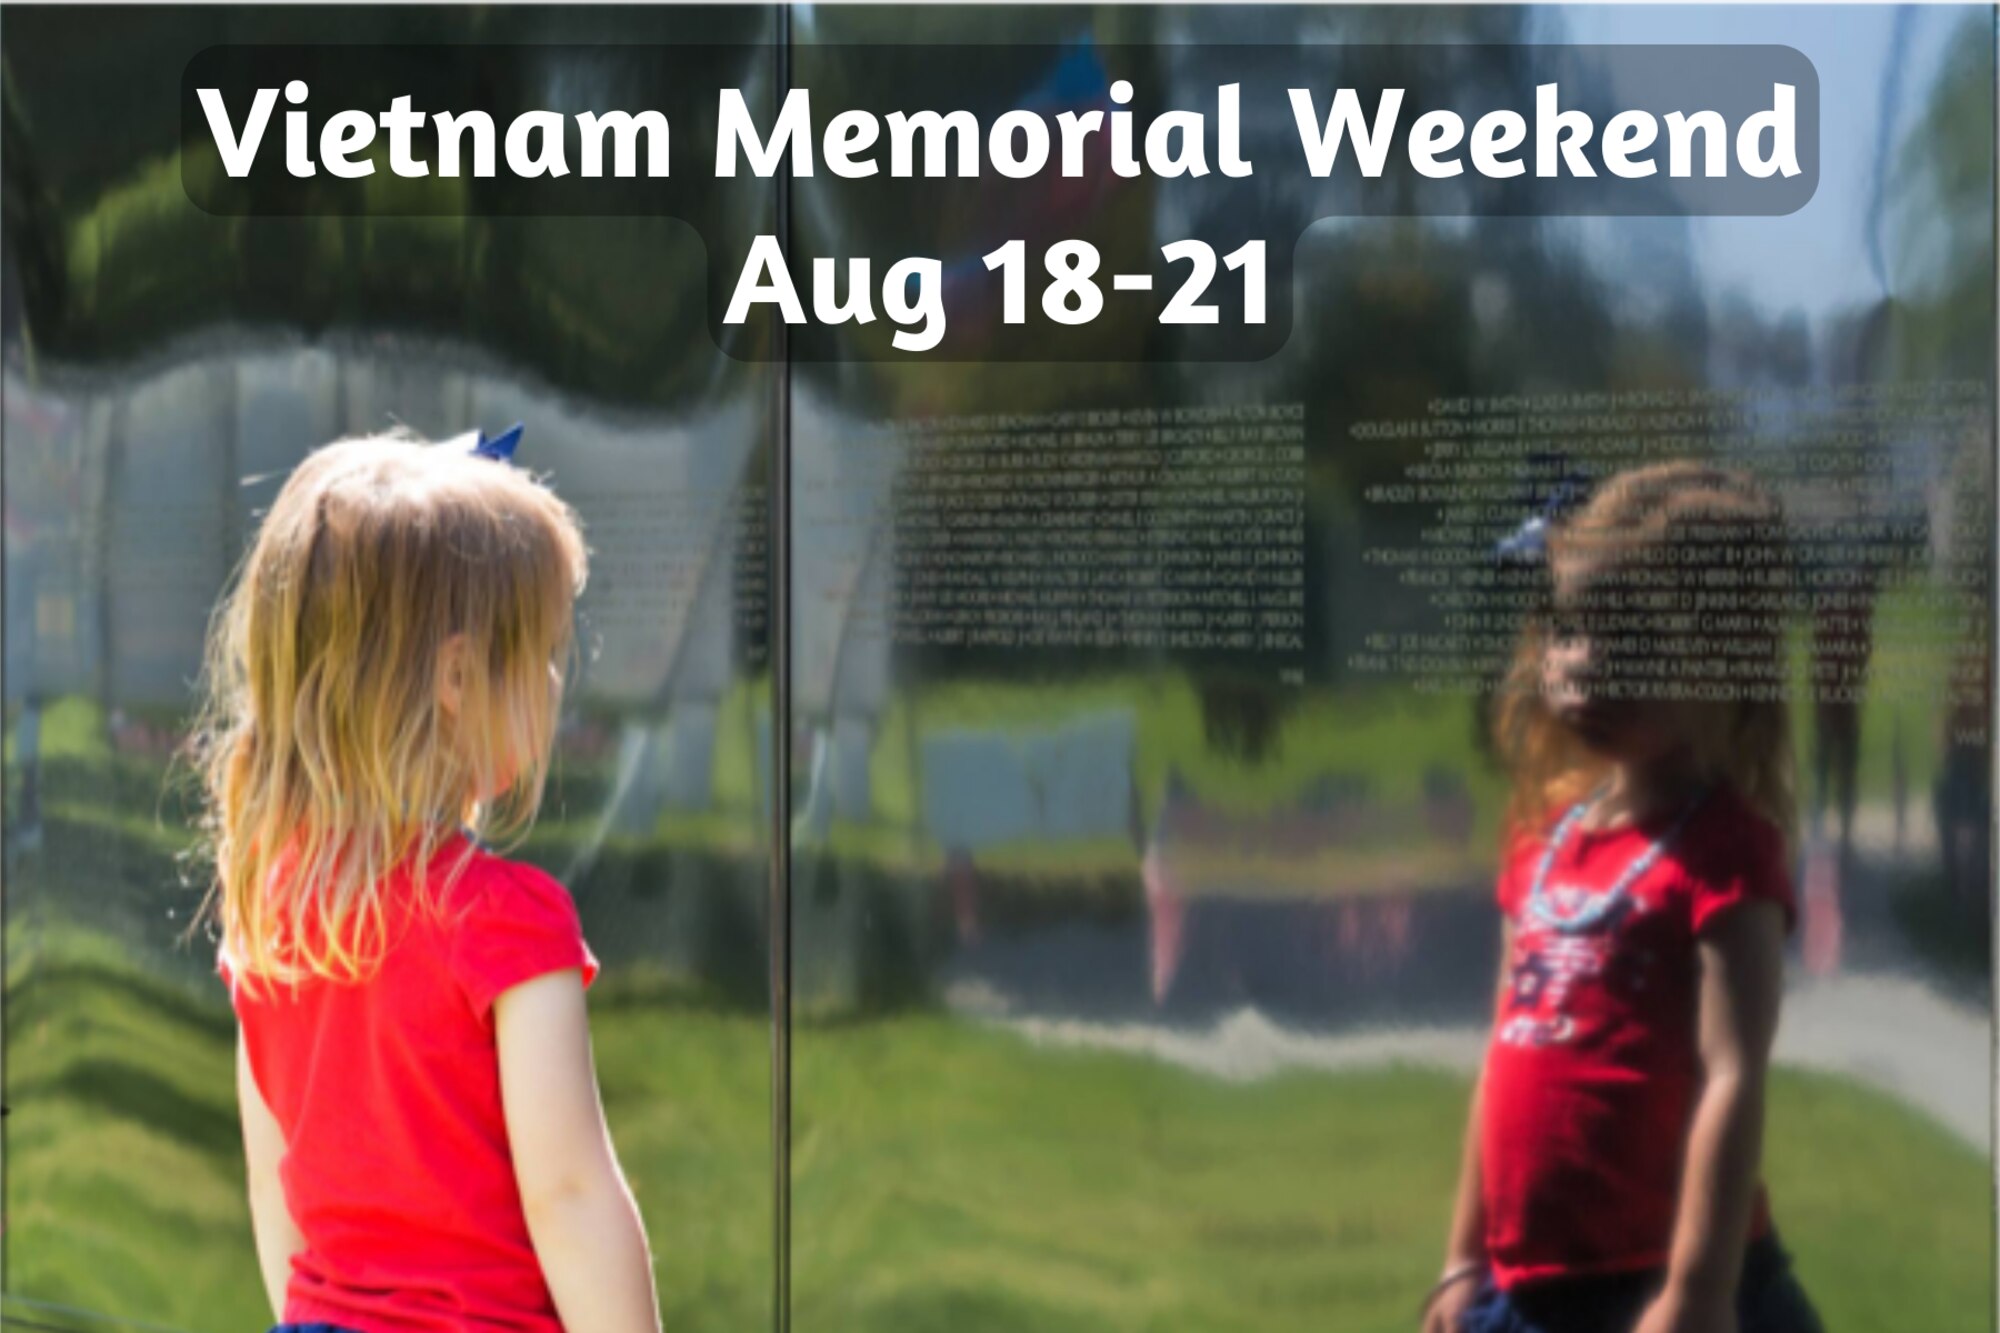 Vietnam Memorial Weekend, Aug 18-21 printed above a photo of a young child looking at the Vietnam Memorial Wall.